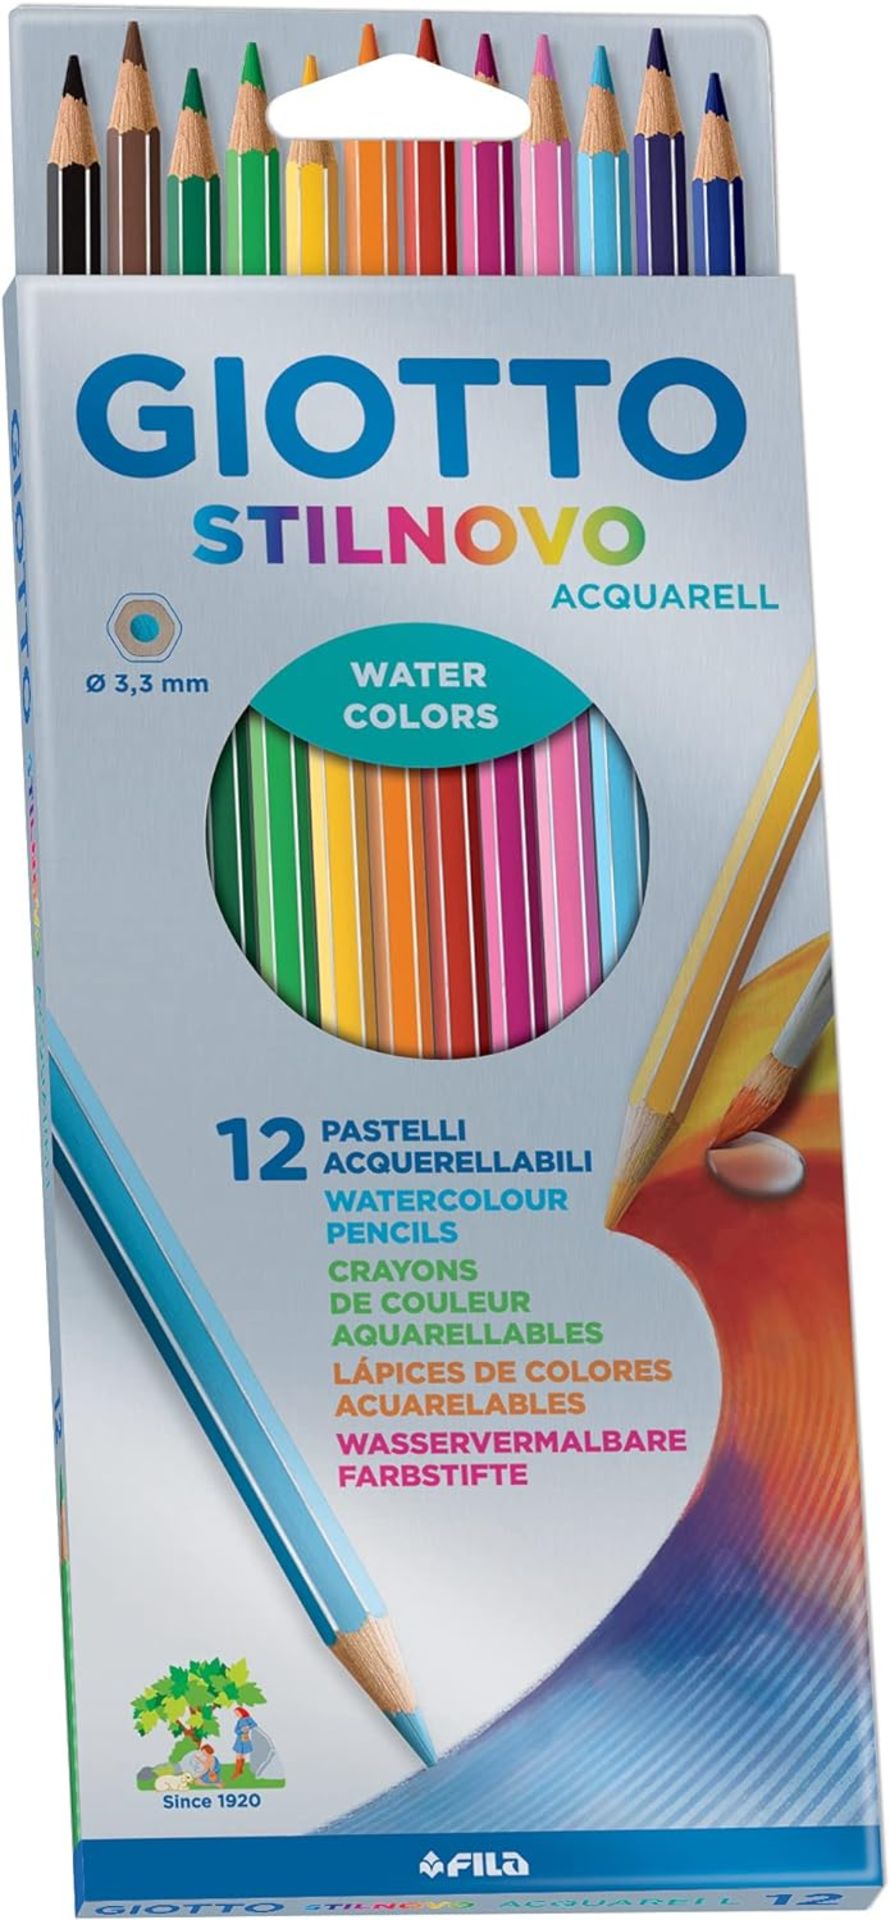 20 X BRAND NEW PACKS OF 12 GIOTTO STILLNOVO WATER COLOUR PENCILS R4-8